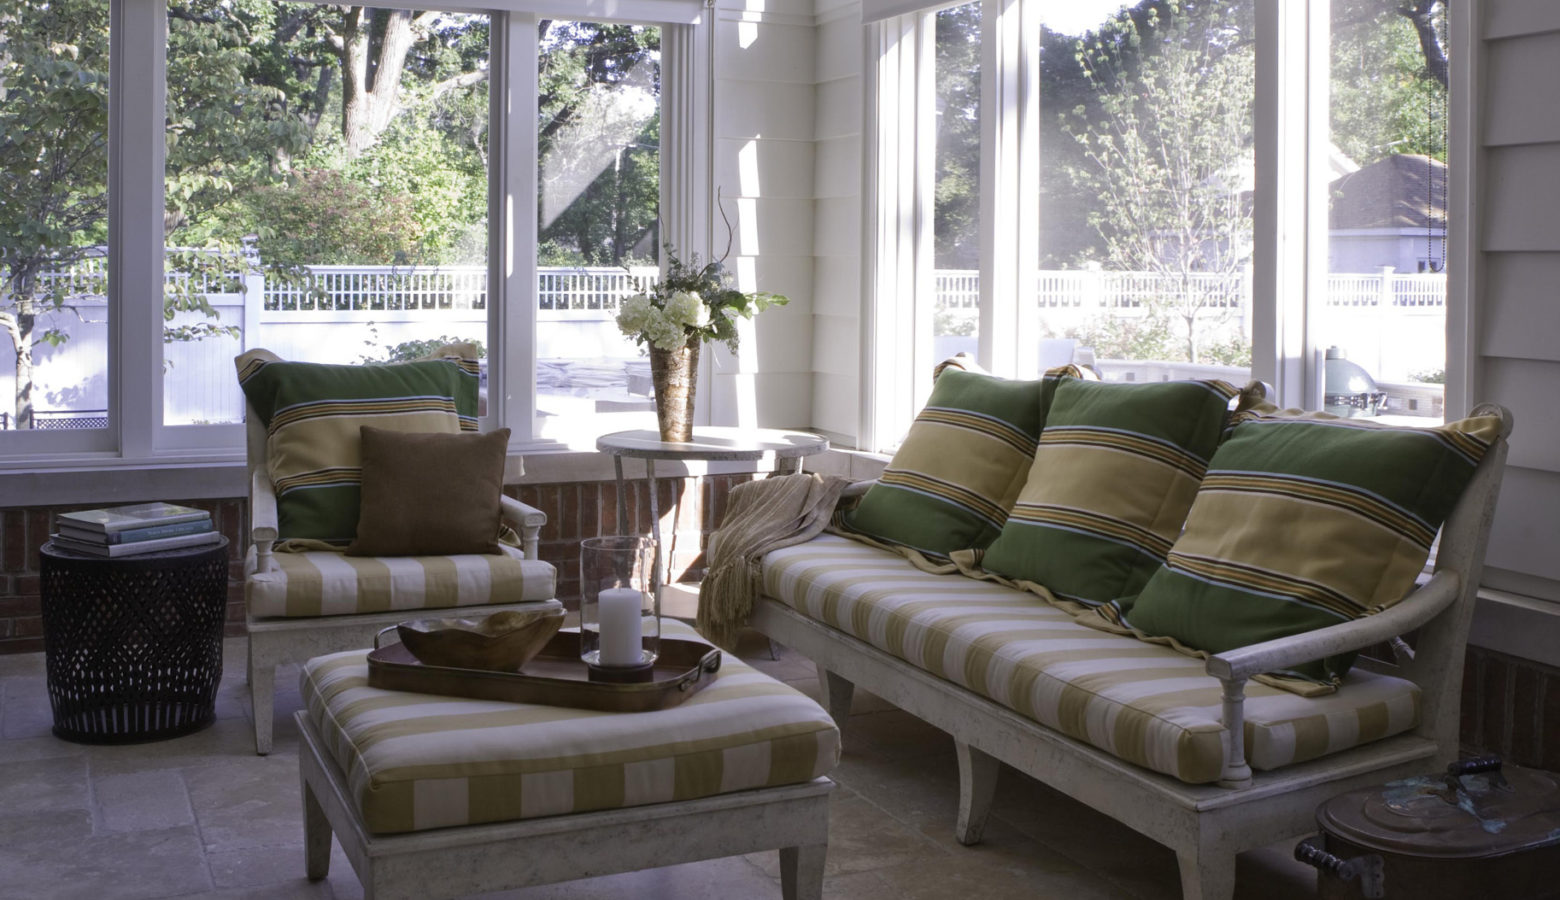 Residential Architecture:  5 Ideas on How Increase Your Home Living Space with Screened Porches